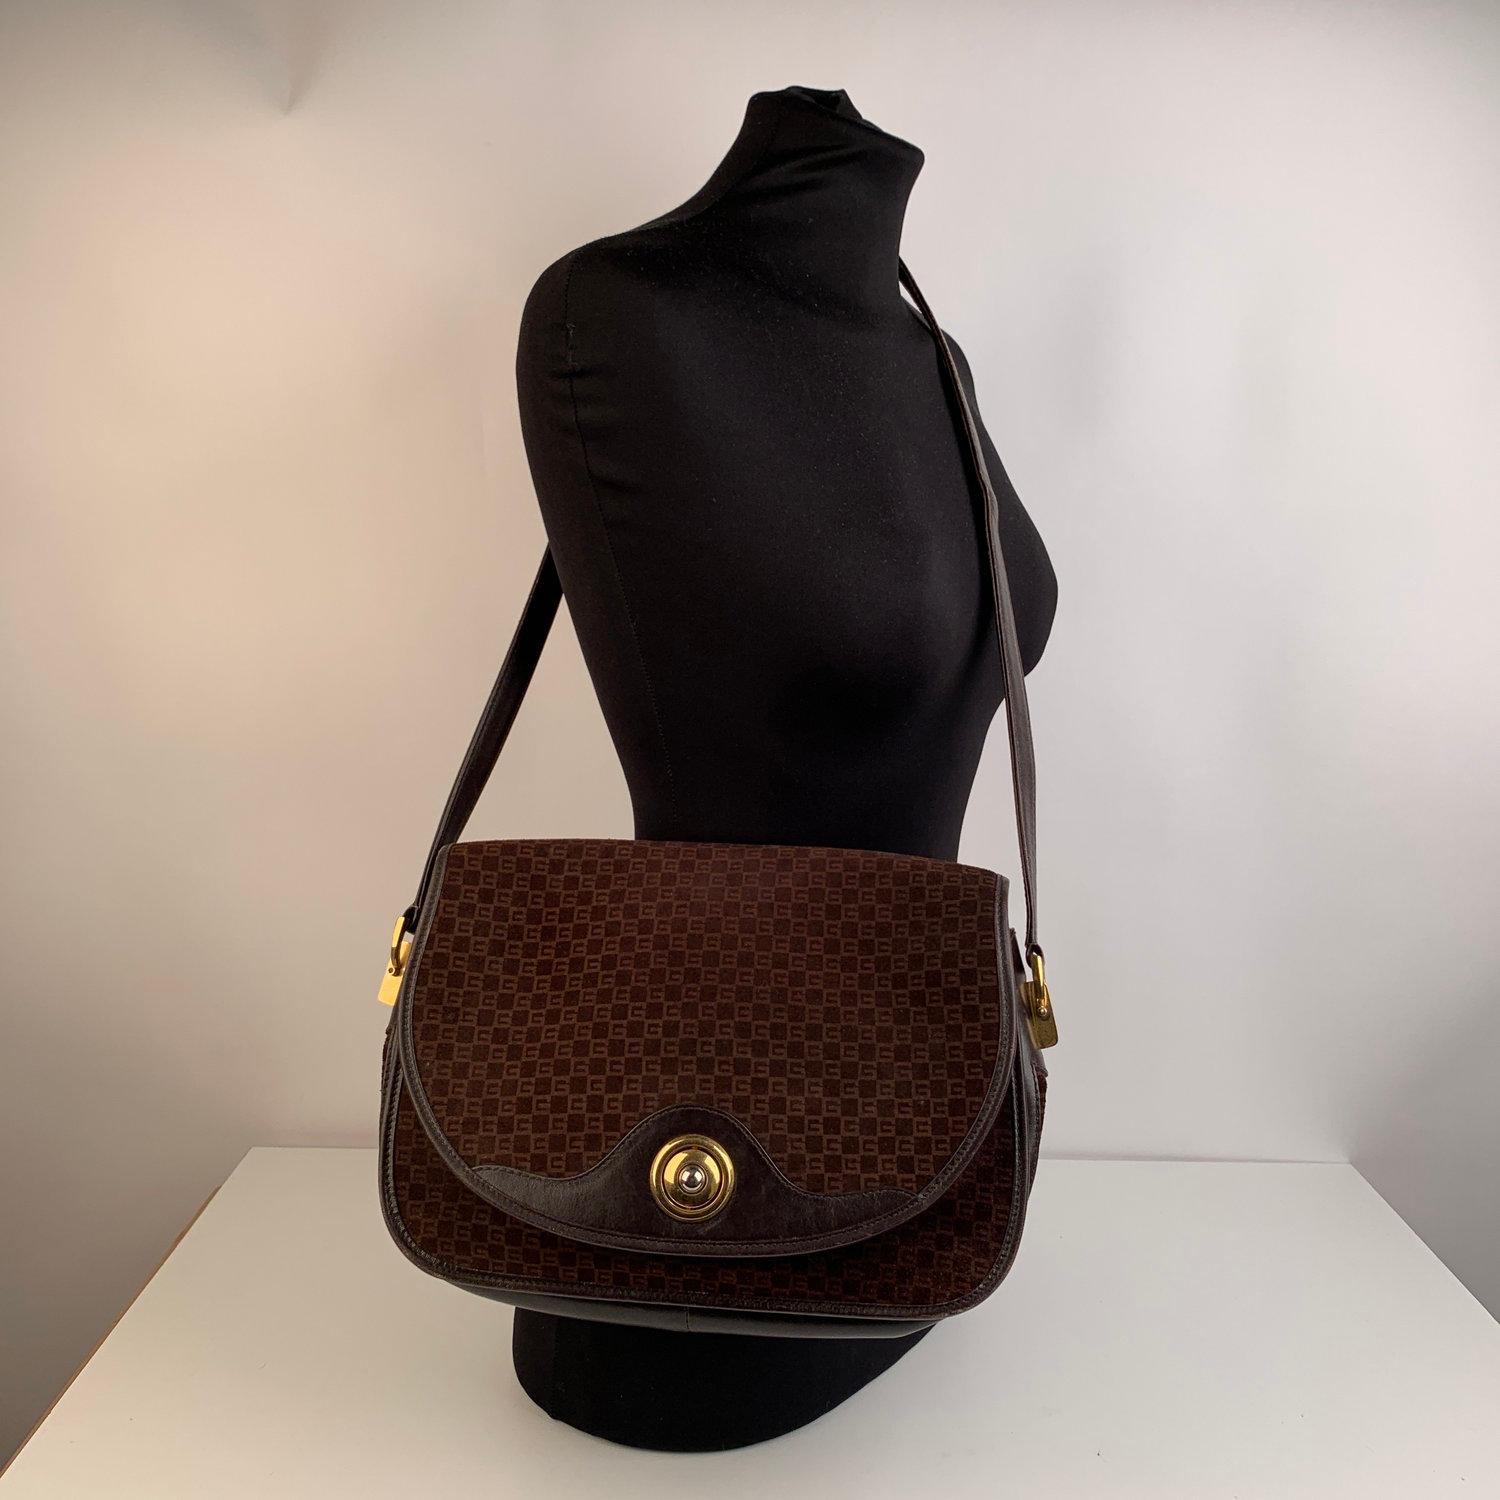 Vintage Gucci messenger or shoulder bag crafted in brown monogram suede with genuine brown leather trim. Small GG light brown monograms. Main flap closure. Internal leather lining. . Beige diamond lining . 3 compartments inside and a zipper pocket.